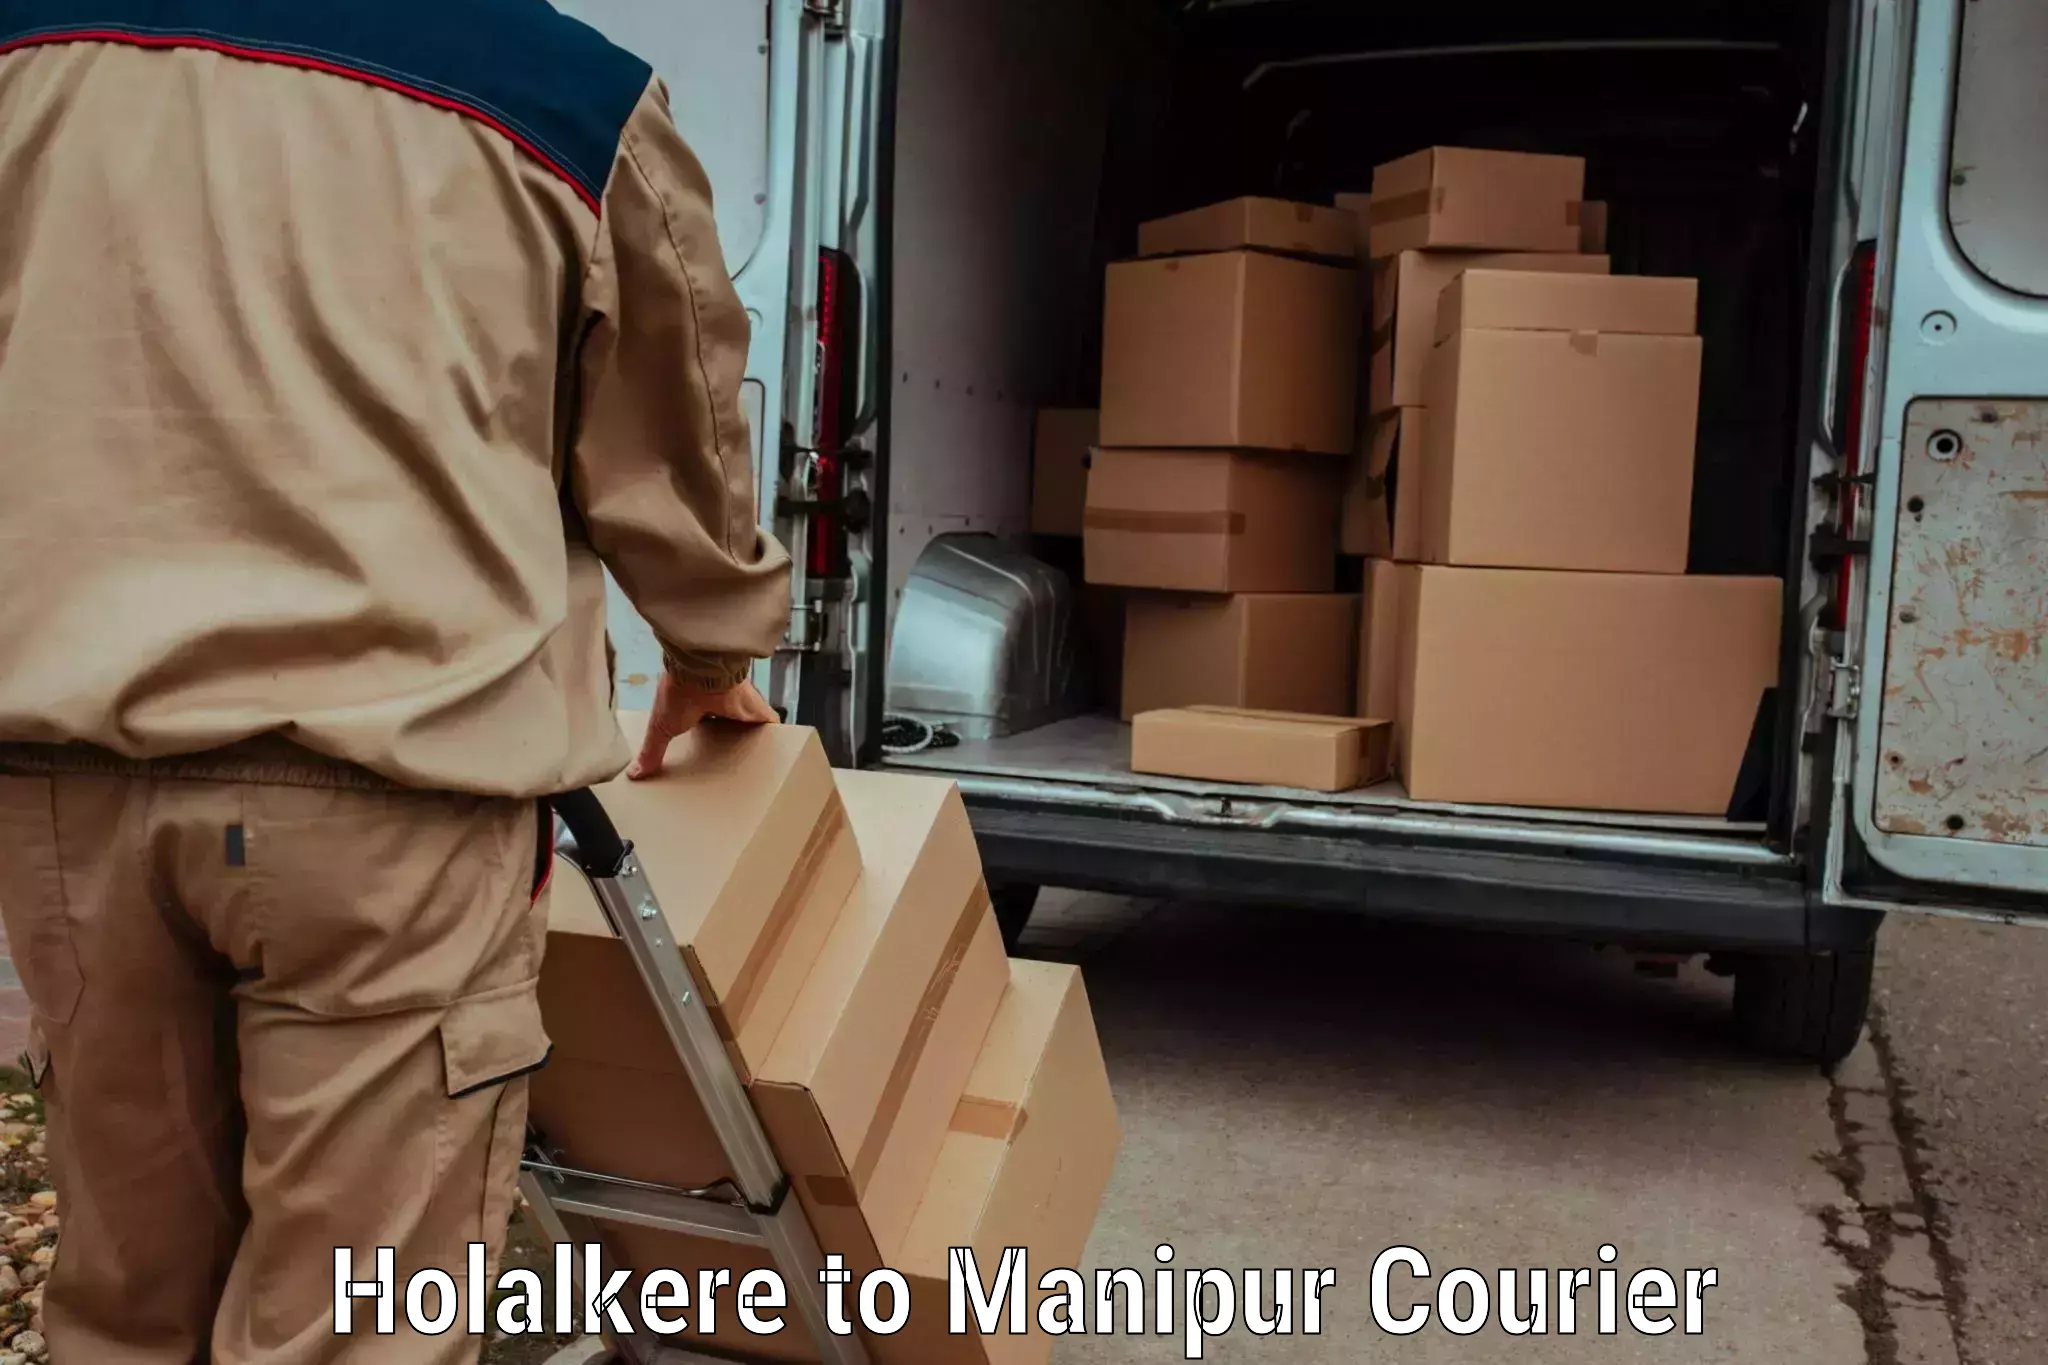 Modern courier technology Holalkere to Manipur